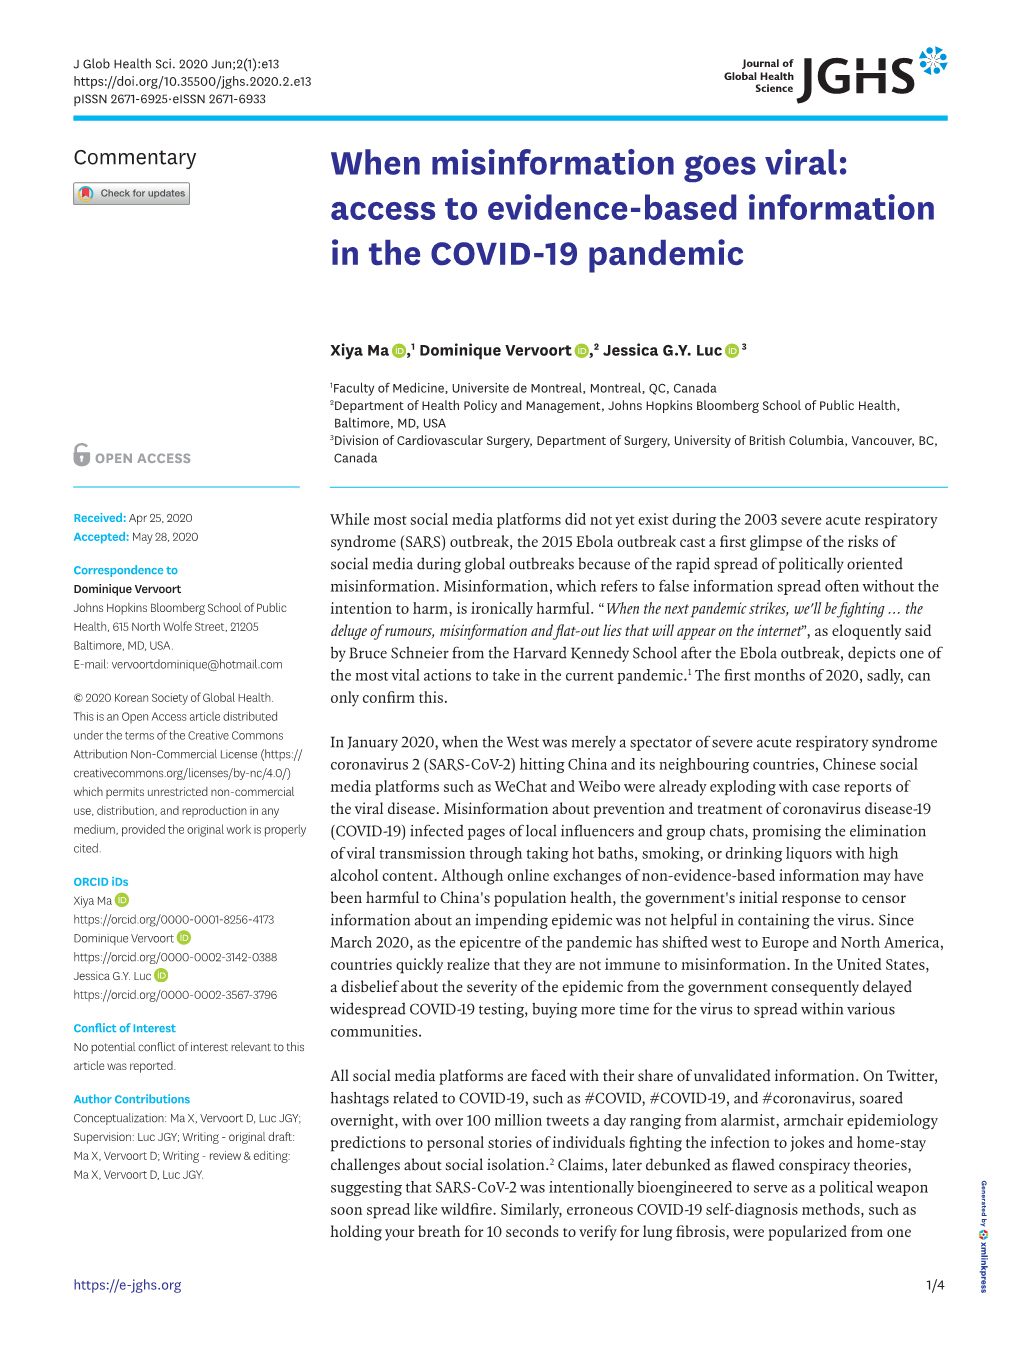 When Misinformation Goes Viral: Access to Evidence-Based Information in the COVID-19 Pandemic